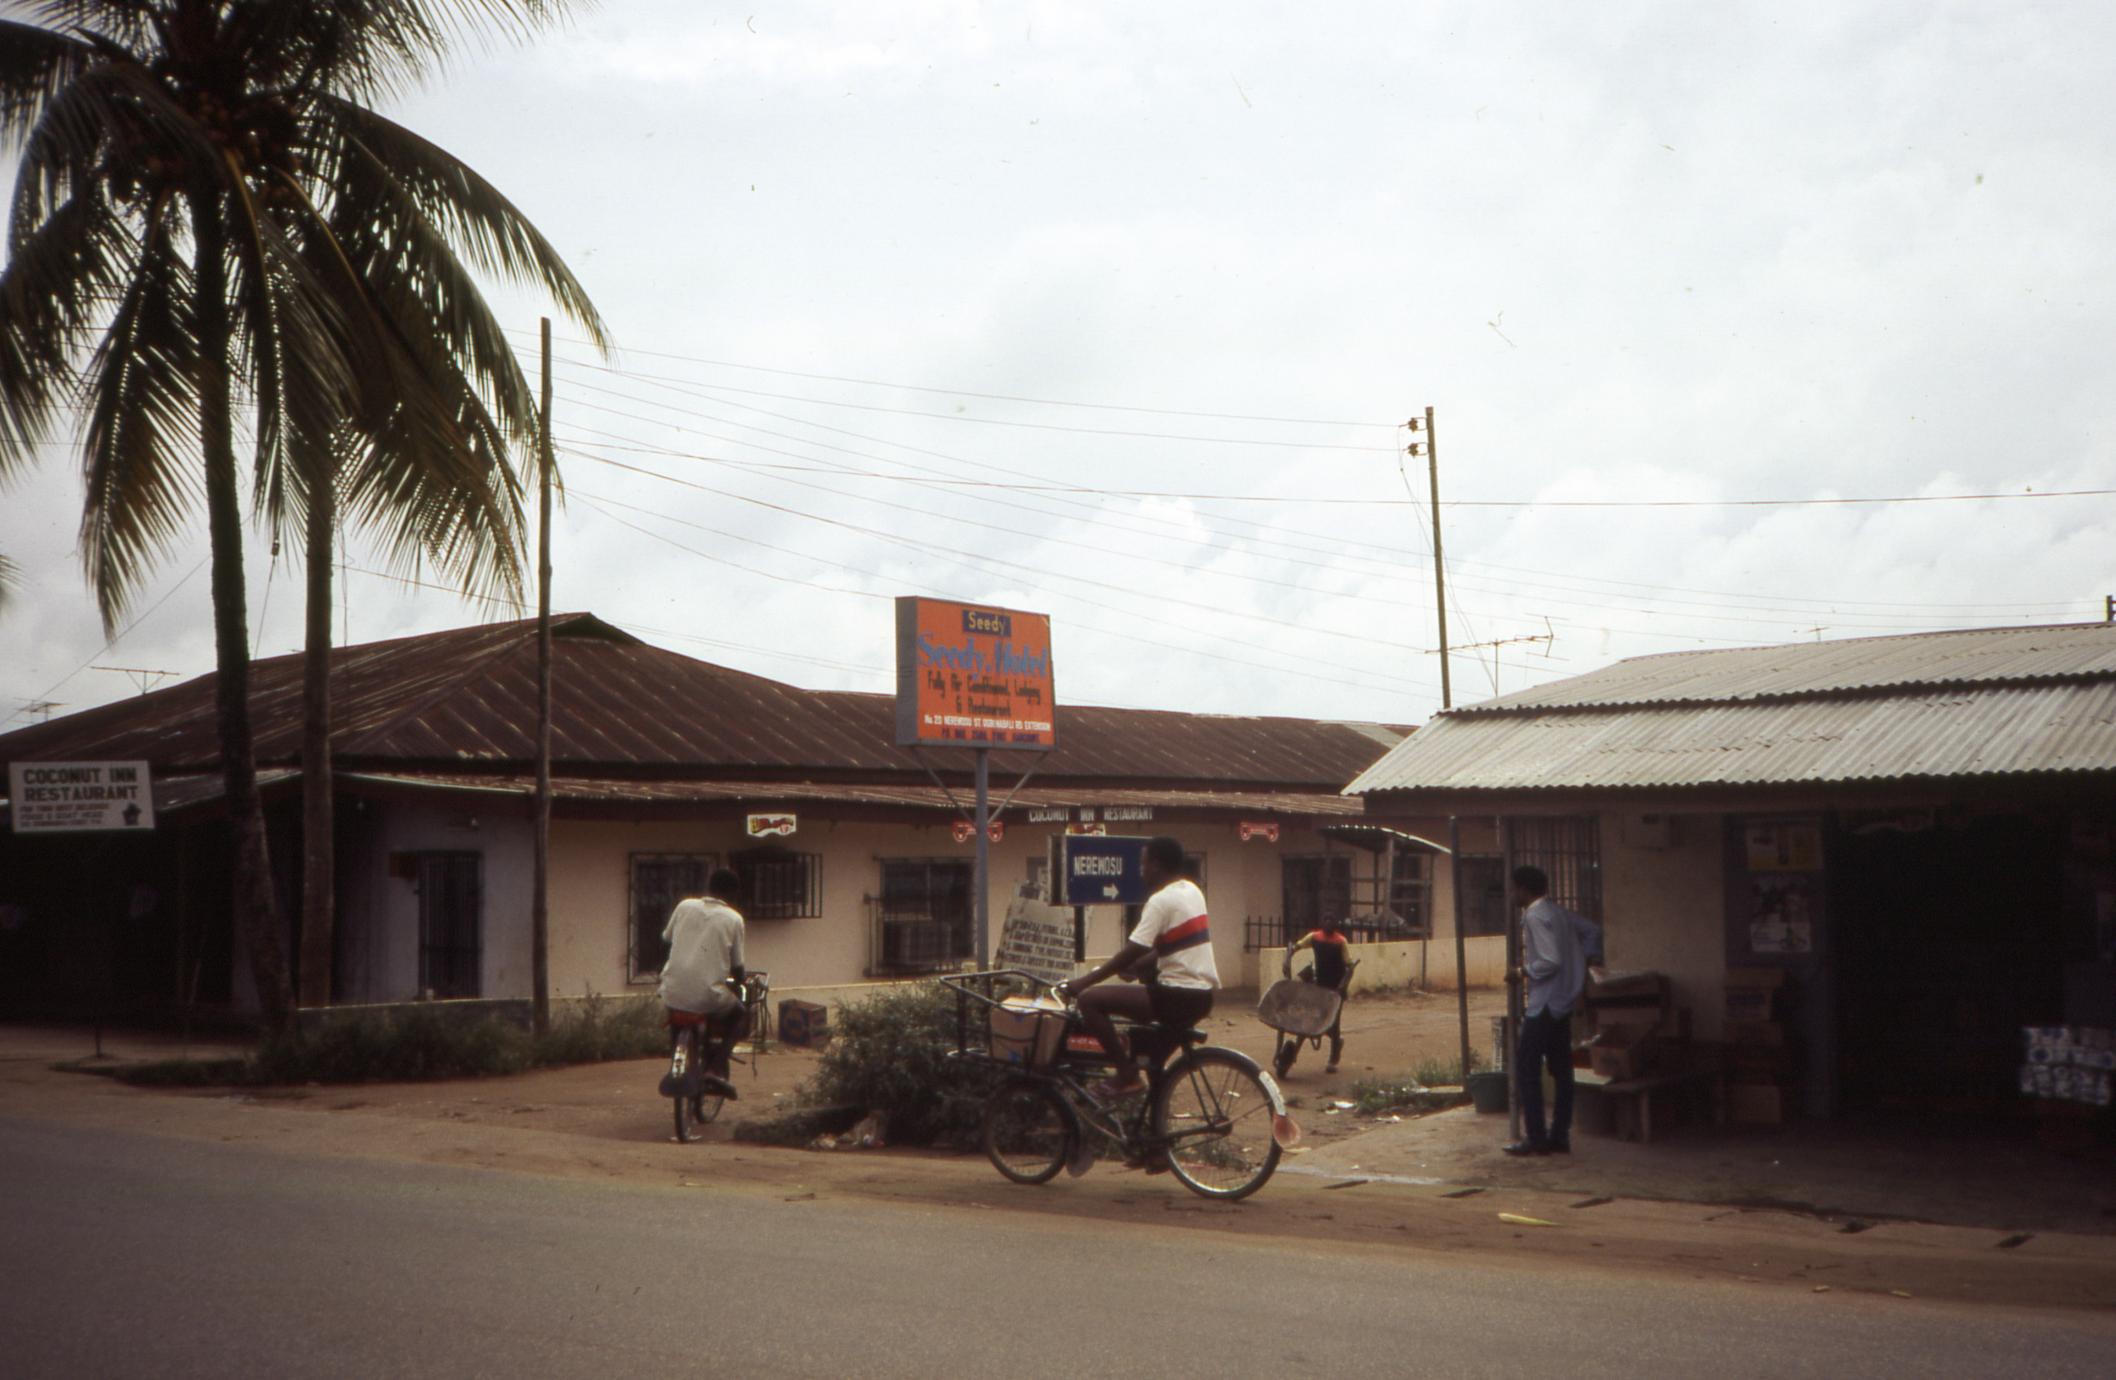 The Seedy Motel in Port Harcourt